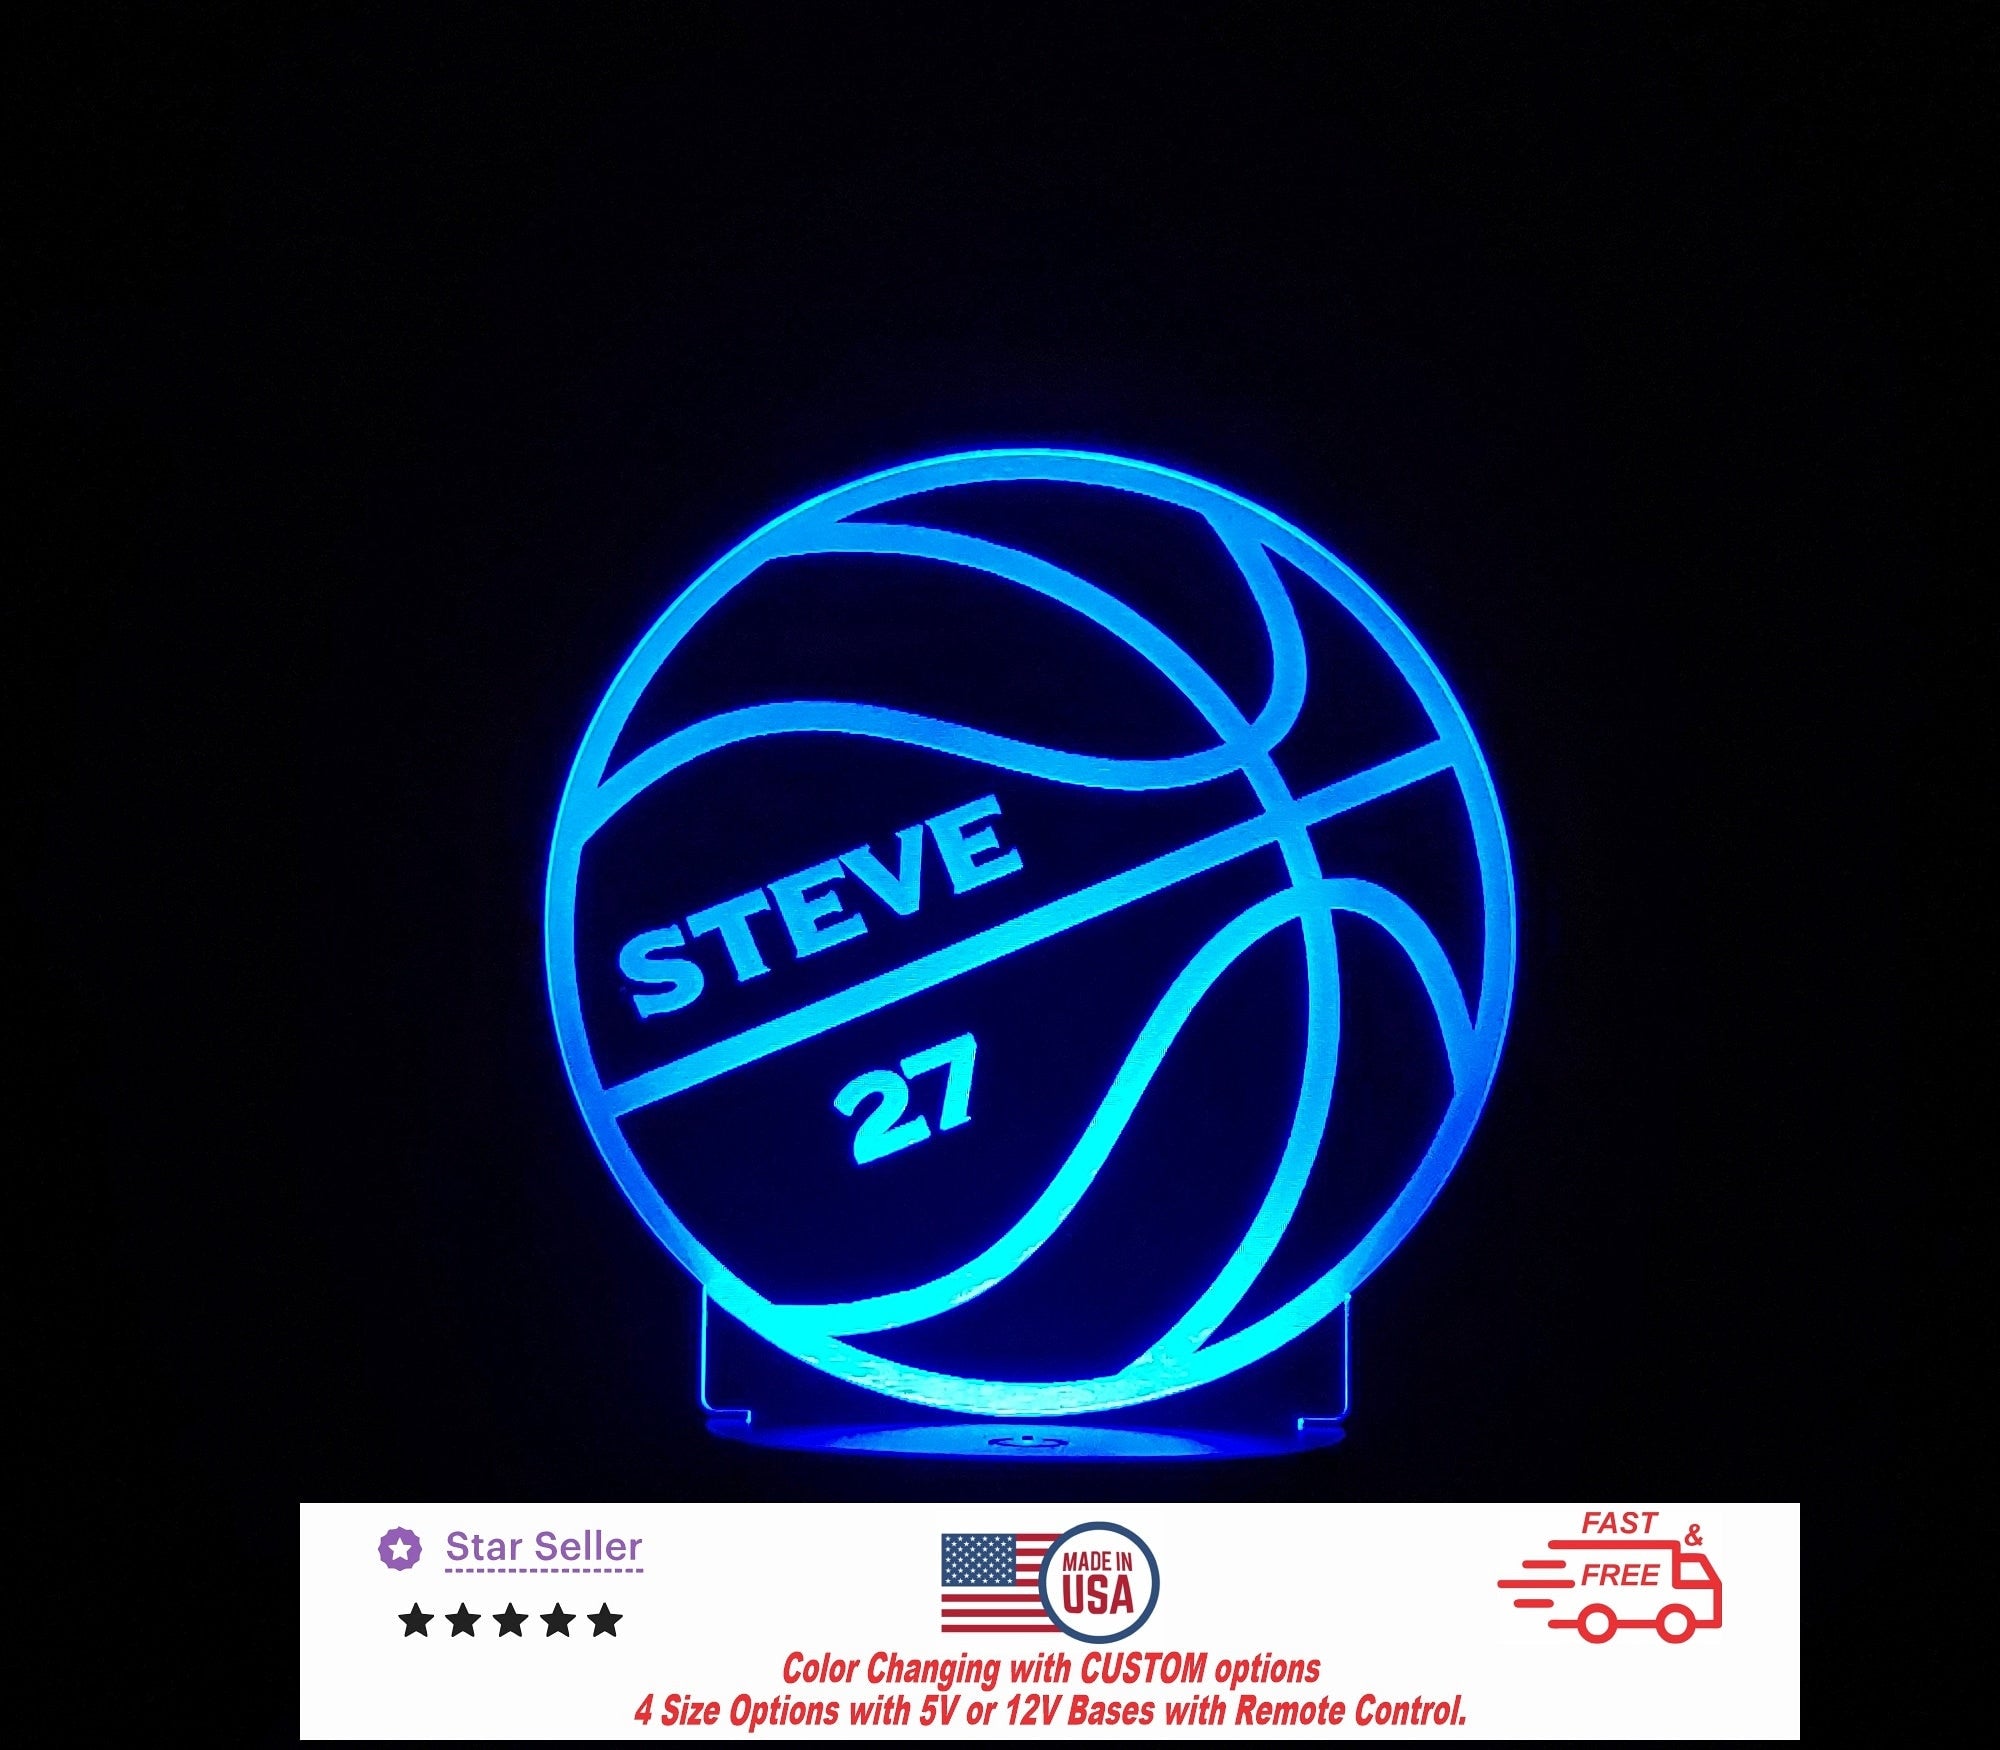 Basketball Personalized LED Night Light - Neon sign, Custom Sport SIgn - Sports Bedroom - Game Room Decor 4 Sizes Free shipping Made in USA